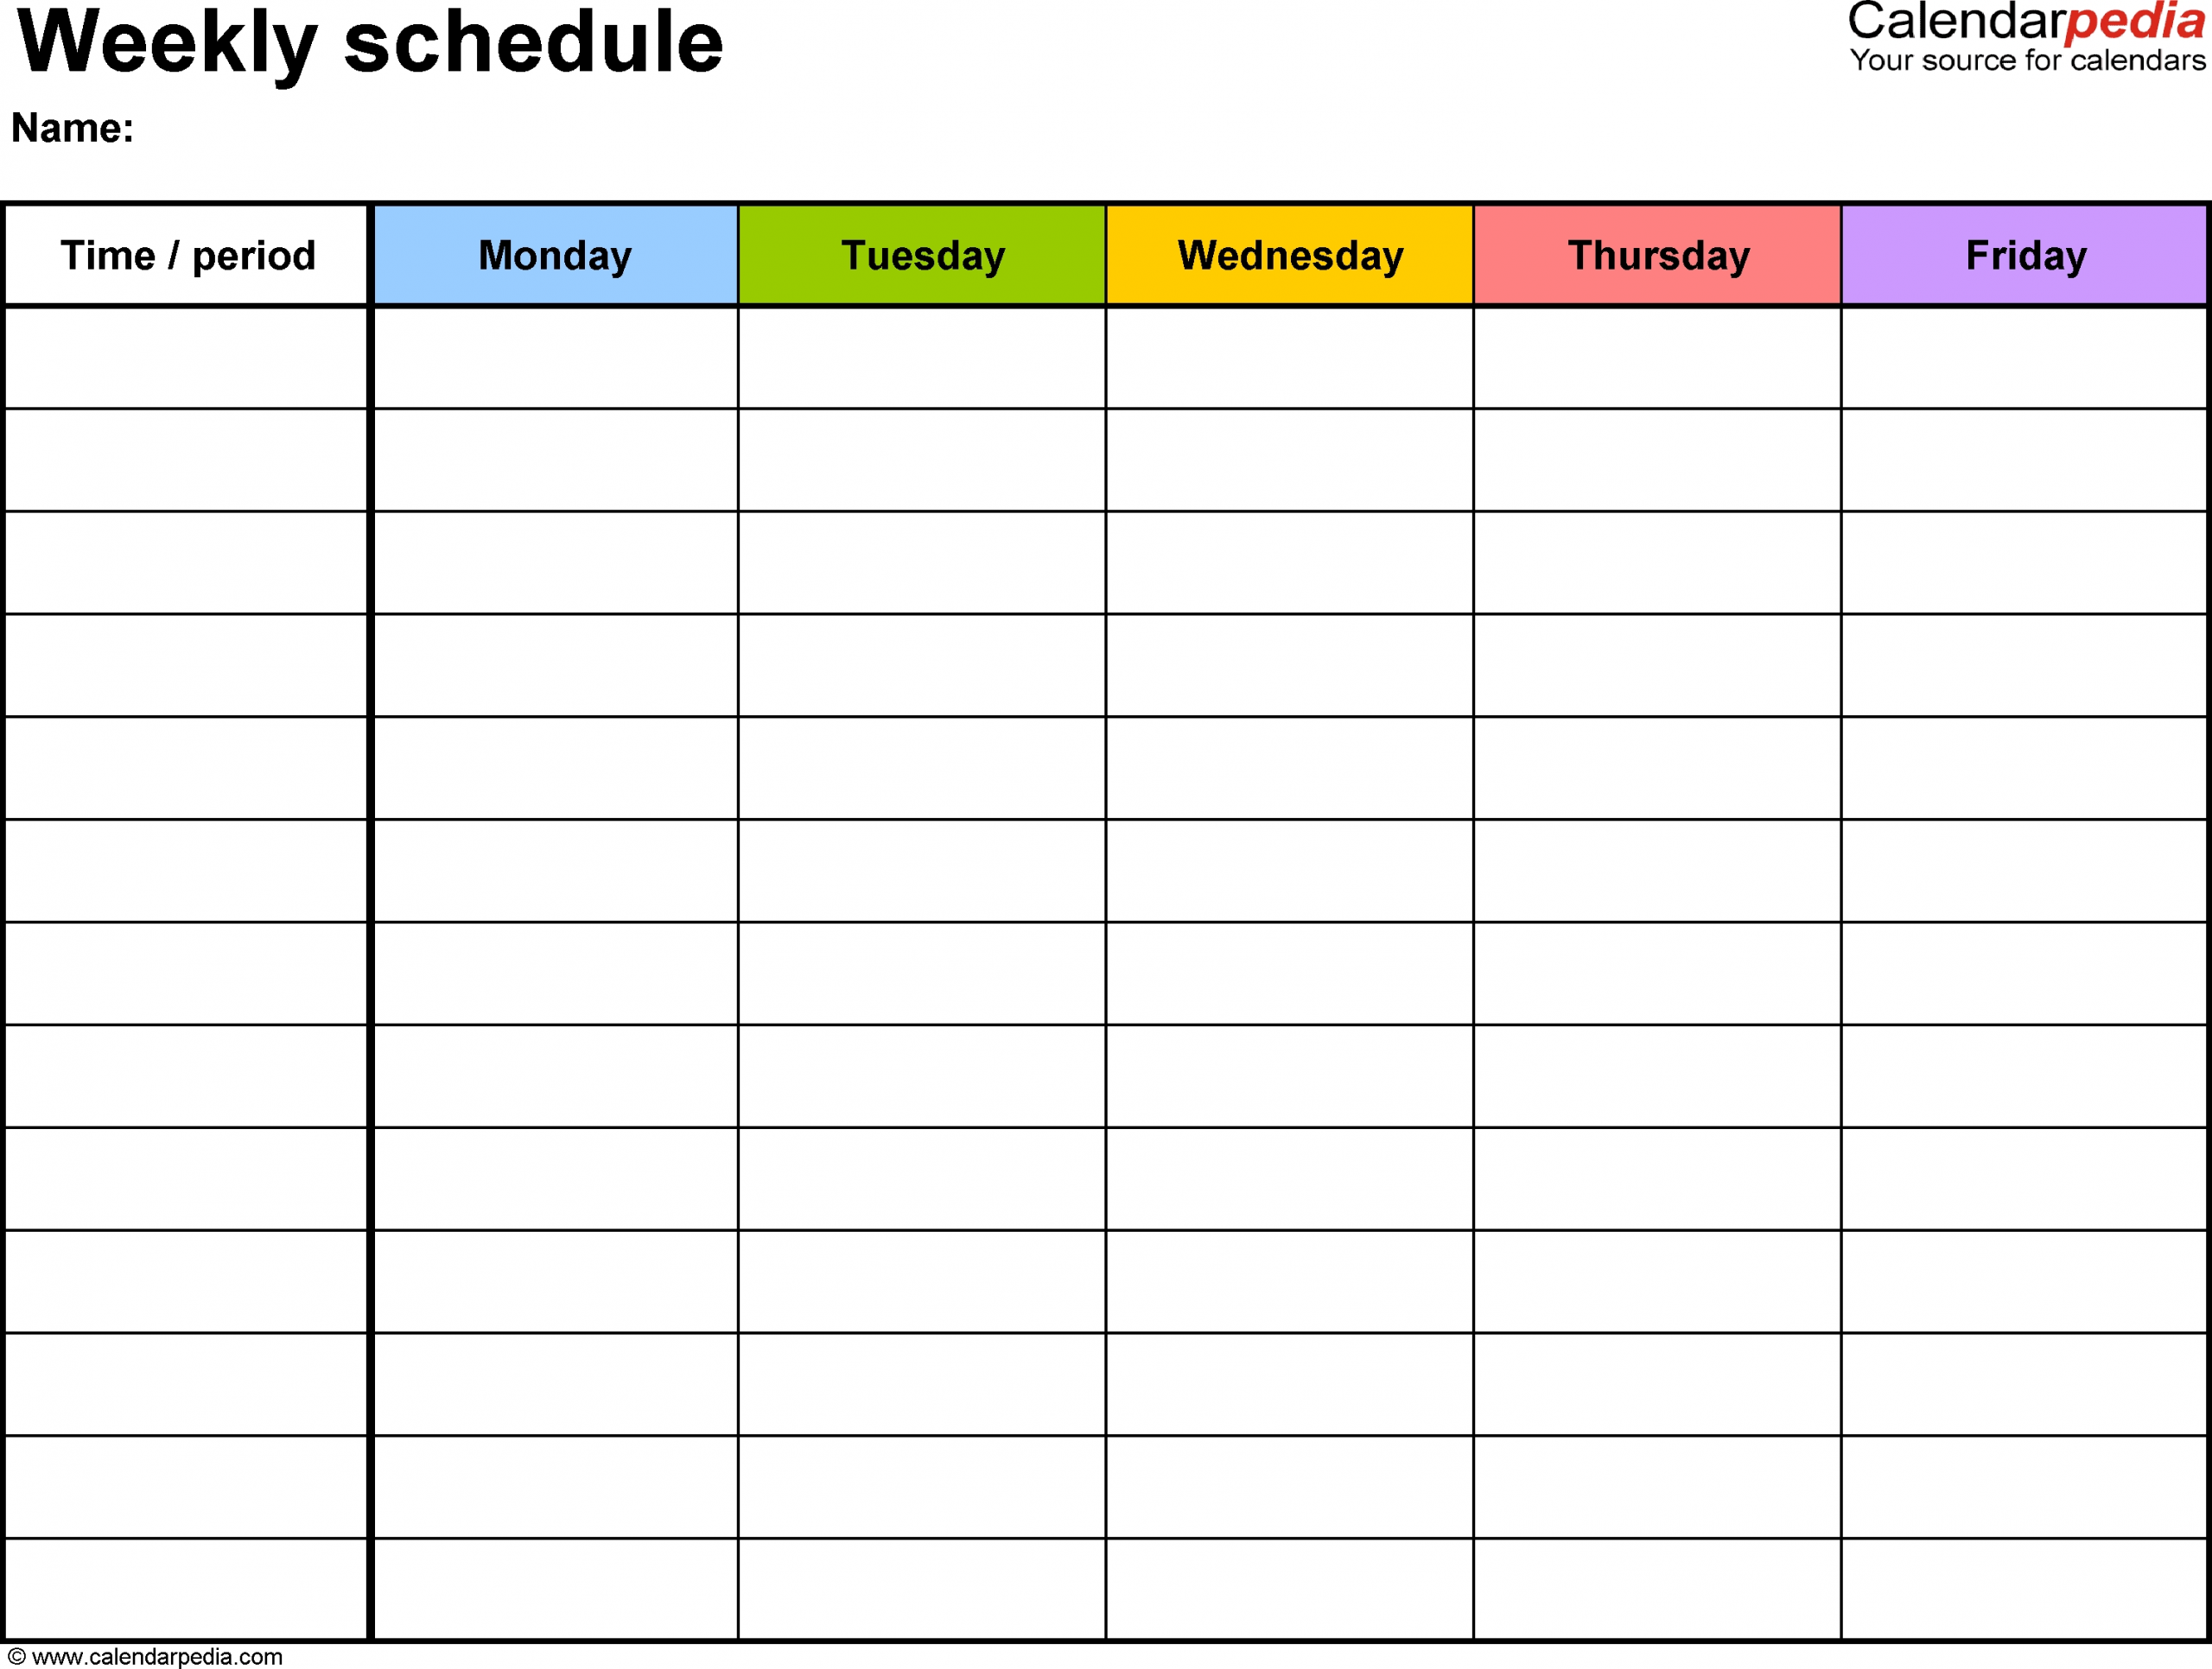 Free Weekly Schedule Templates For Word - 18 Templates Blank Calendar 5 Day Week